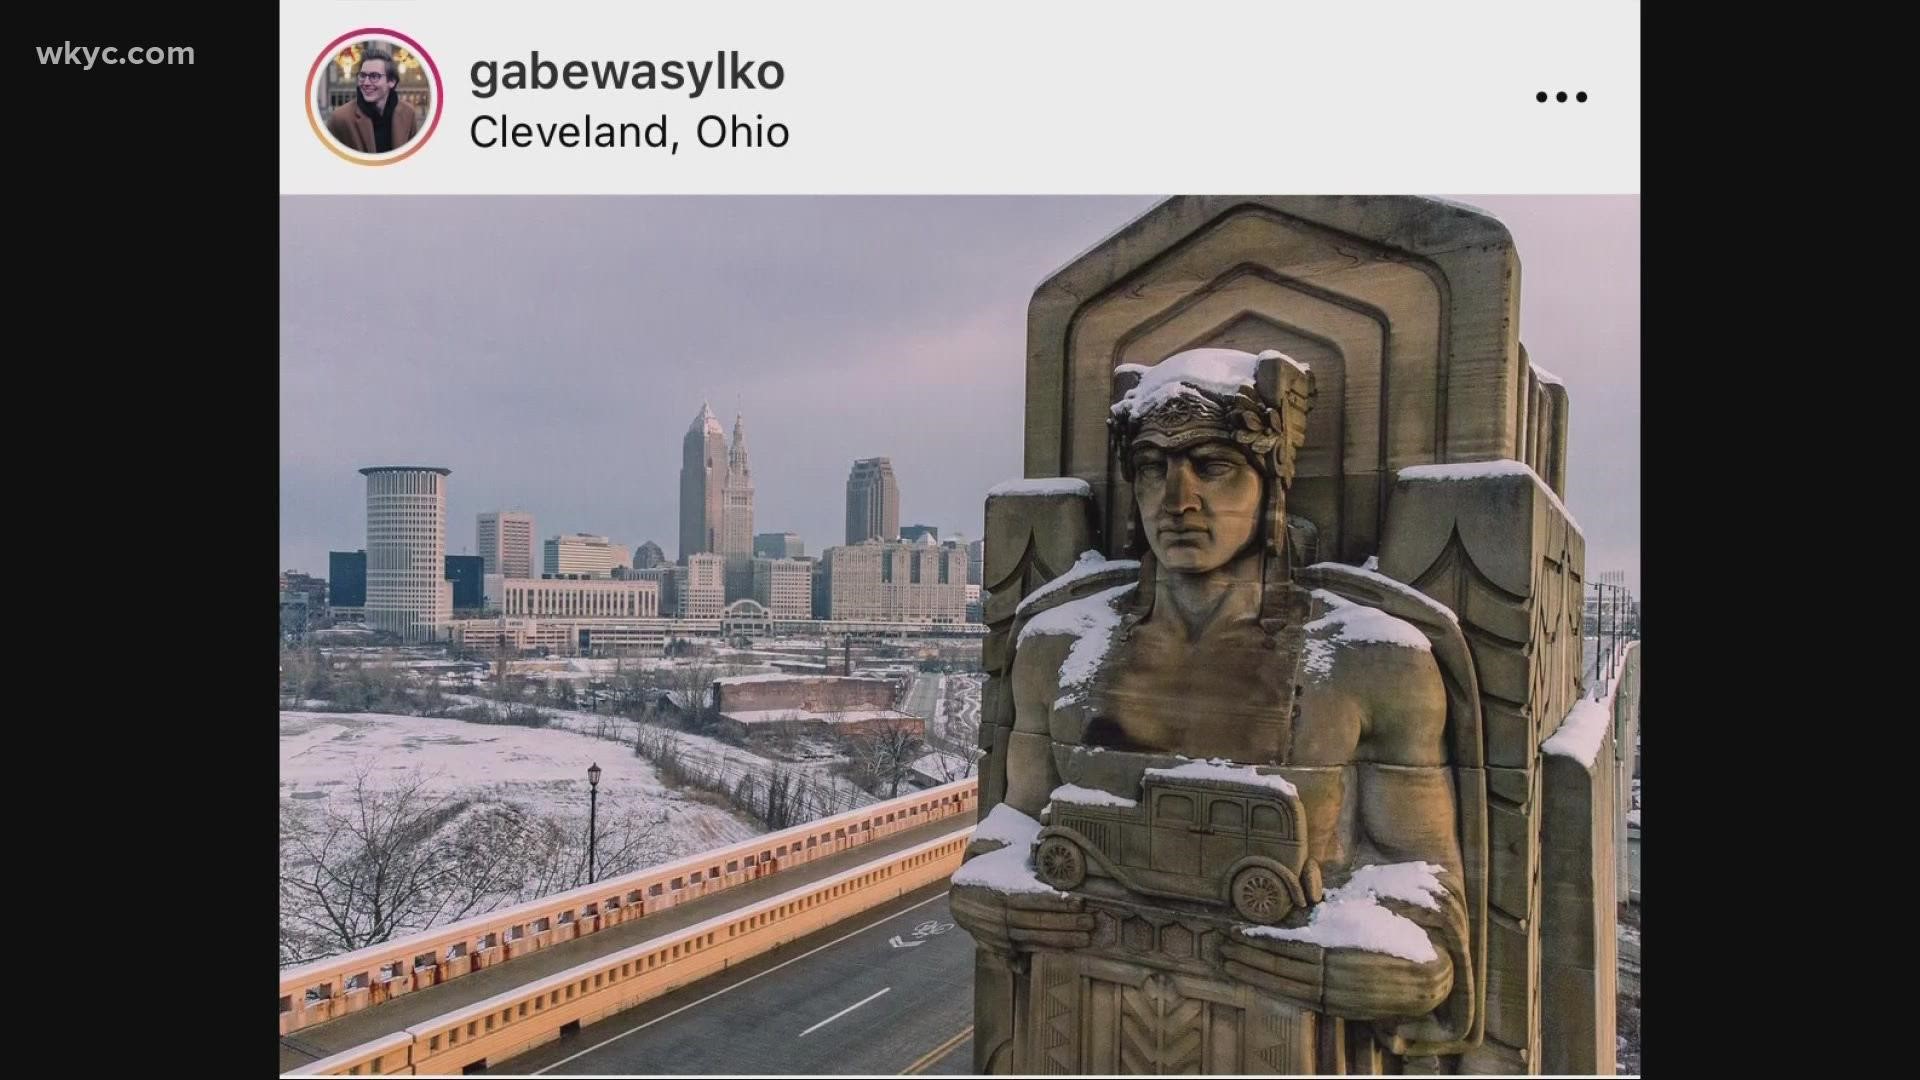 Since the COVID pandemic began, Gabe Wasylko has made it his goal to capture beauty here in Cleveland.